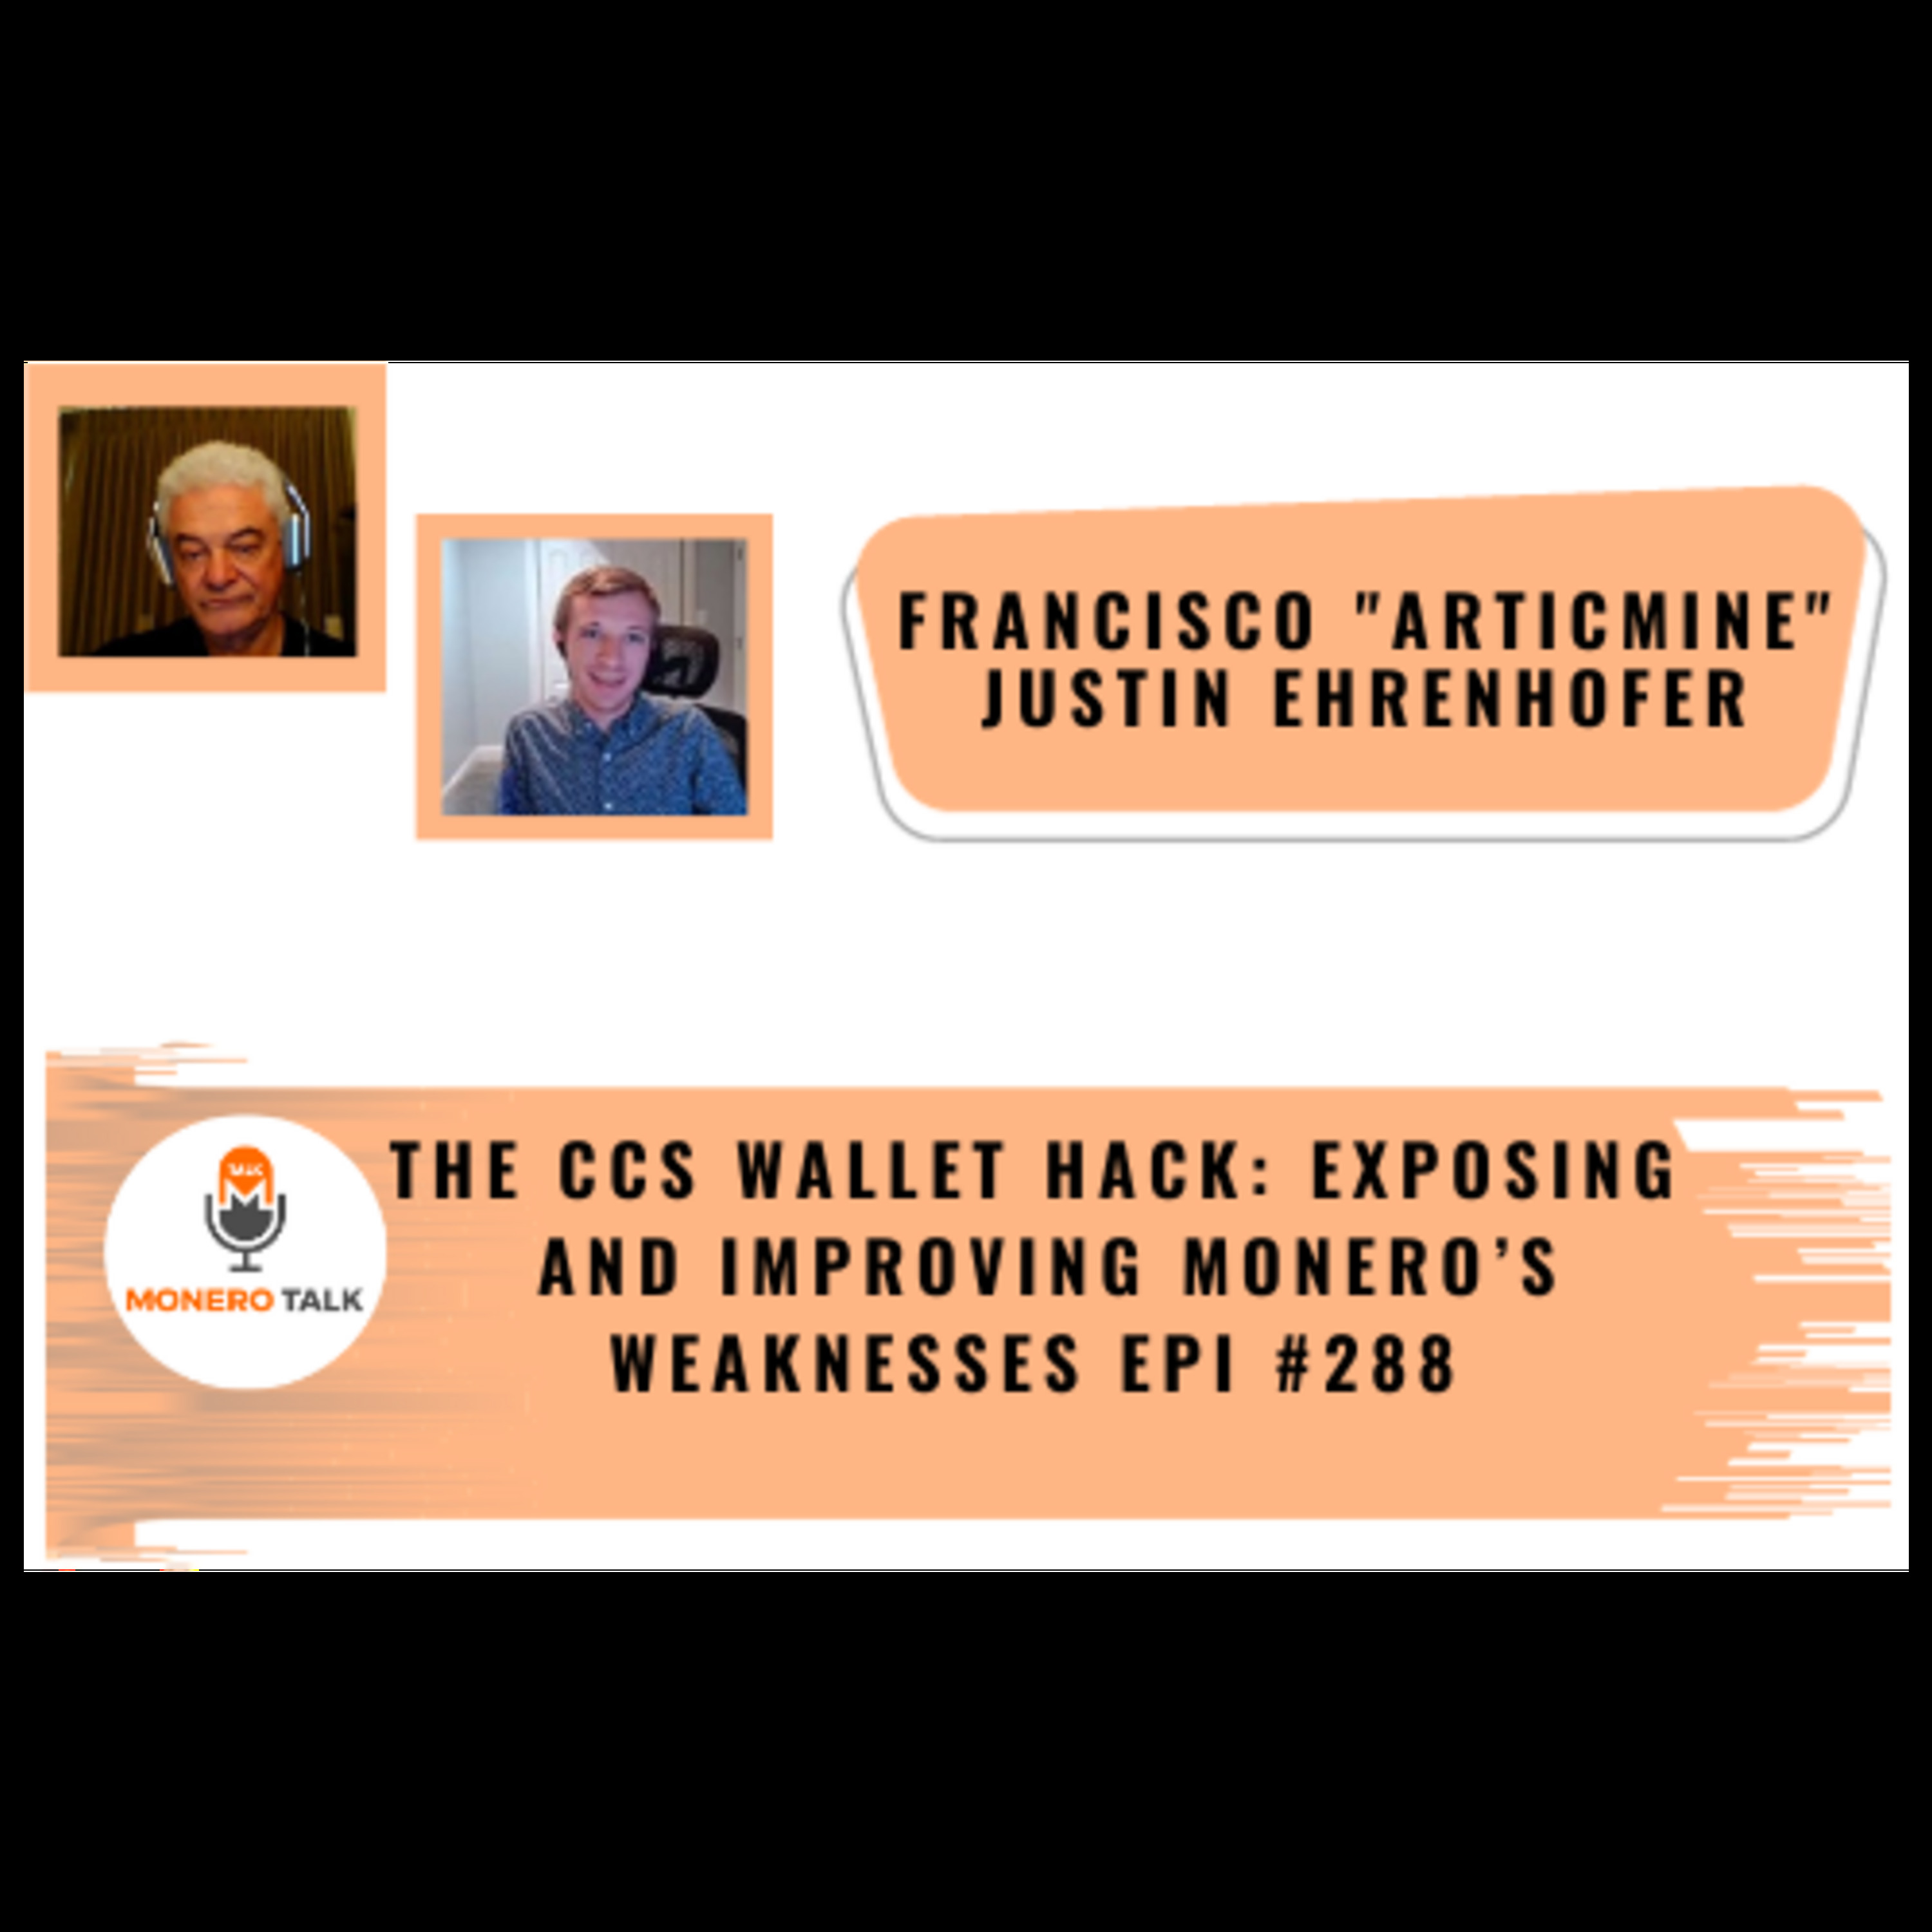 The CCS Wallet Hack: Exposing and Improving Monero’s Weaknesses w/ Francisco 